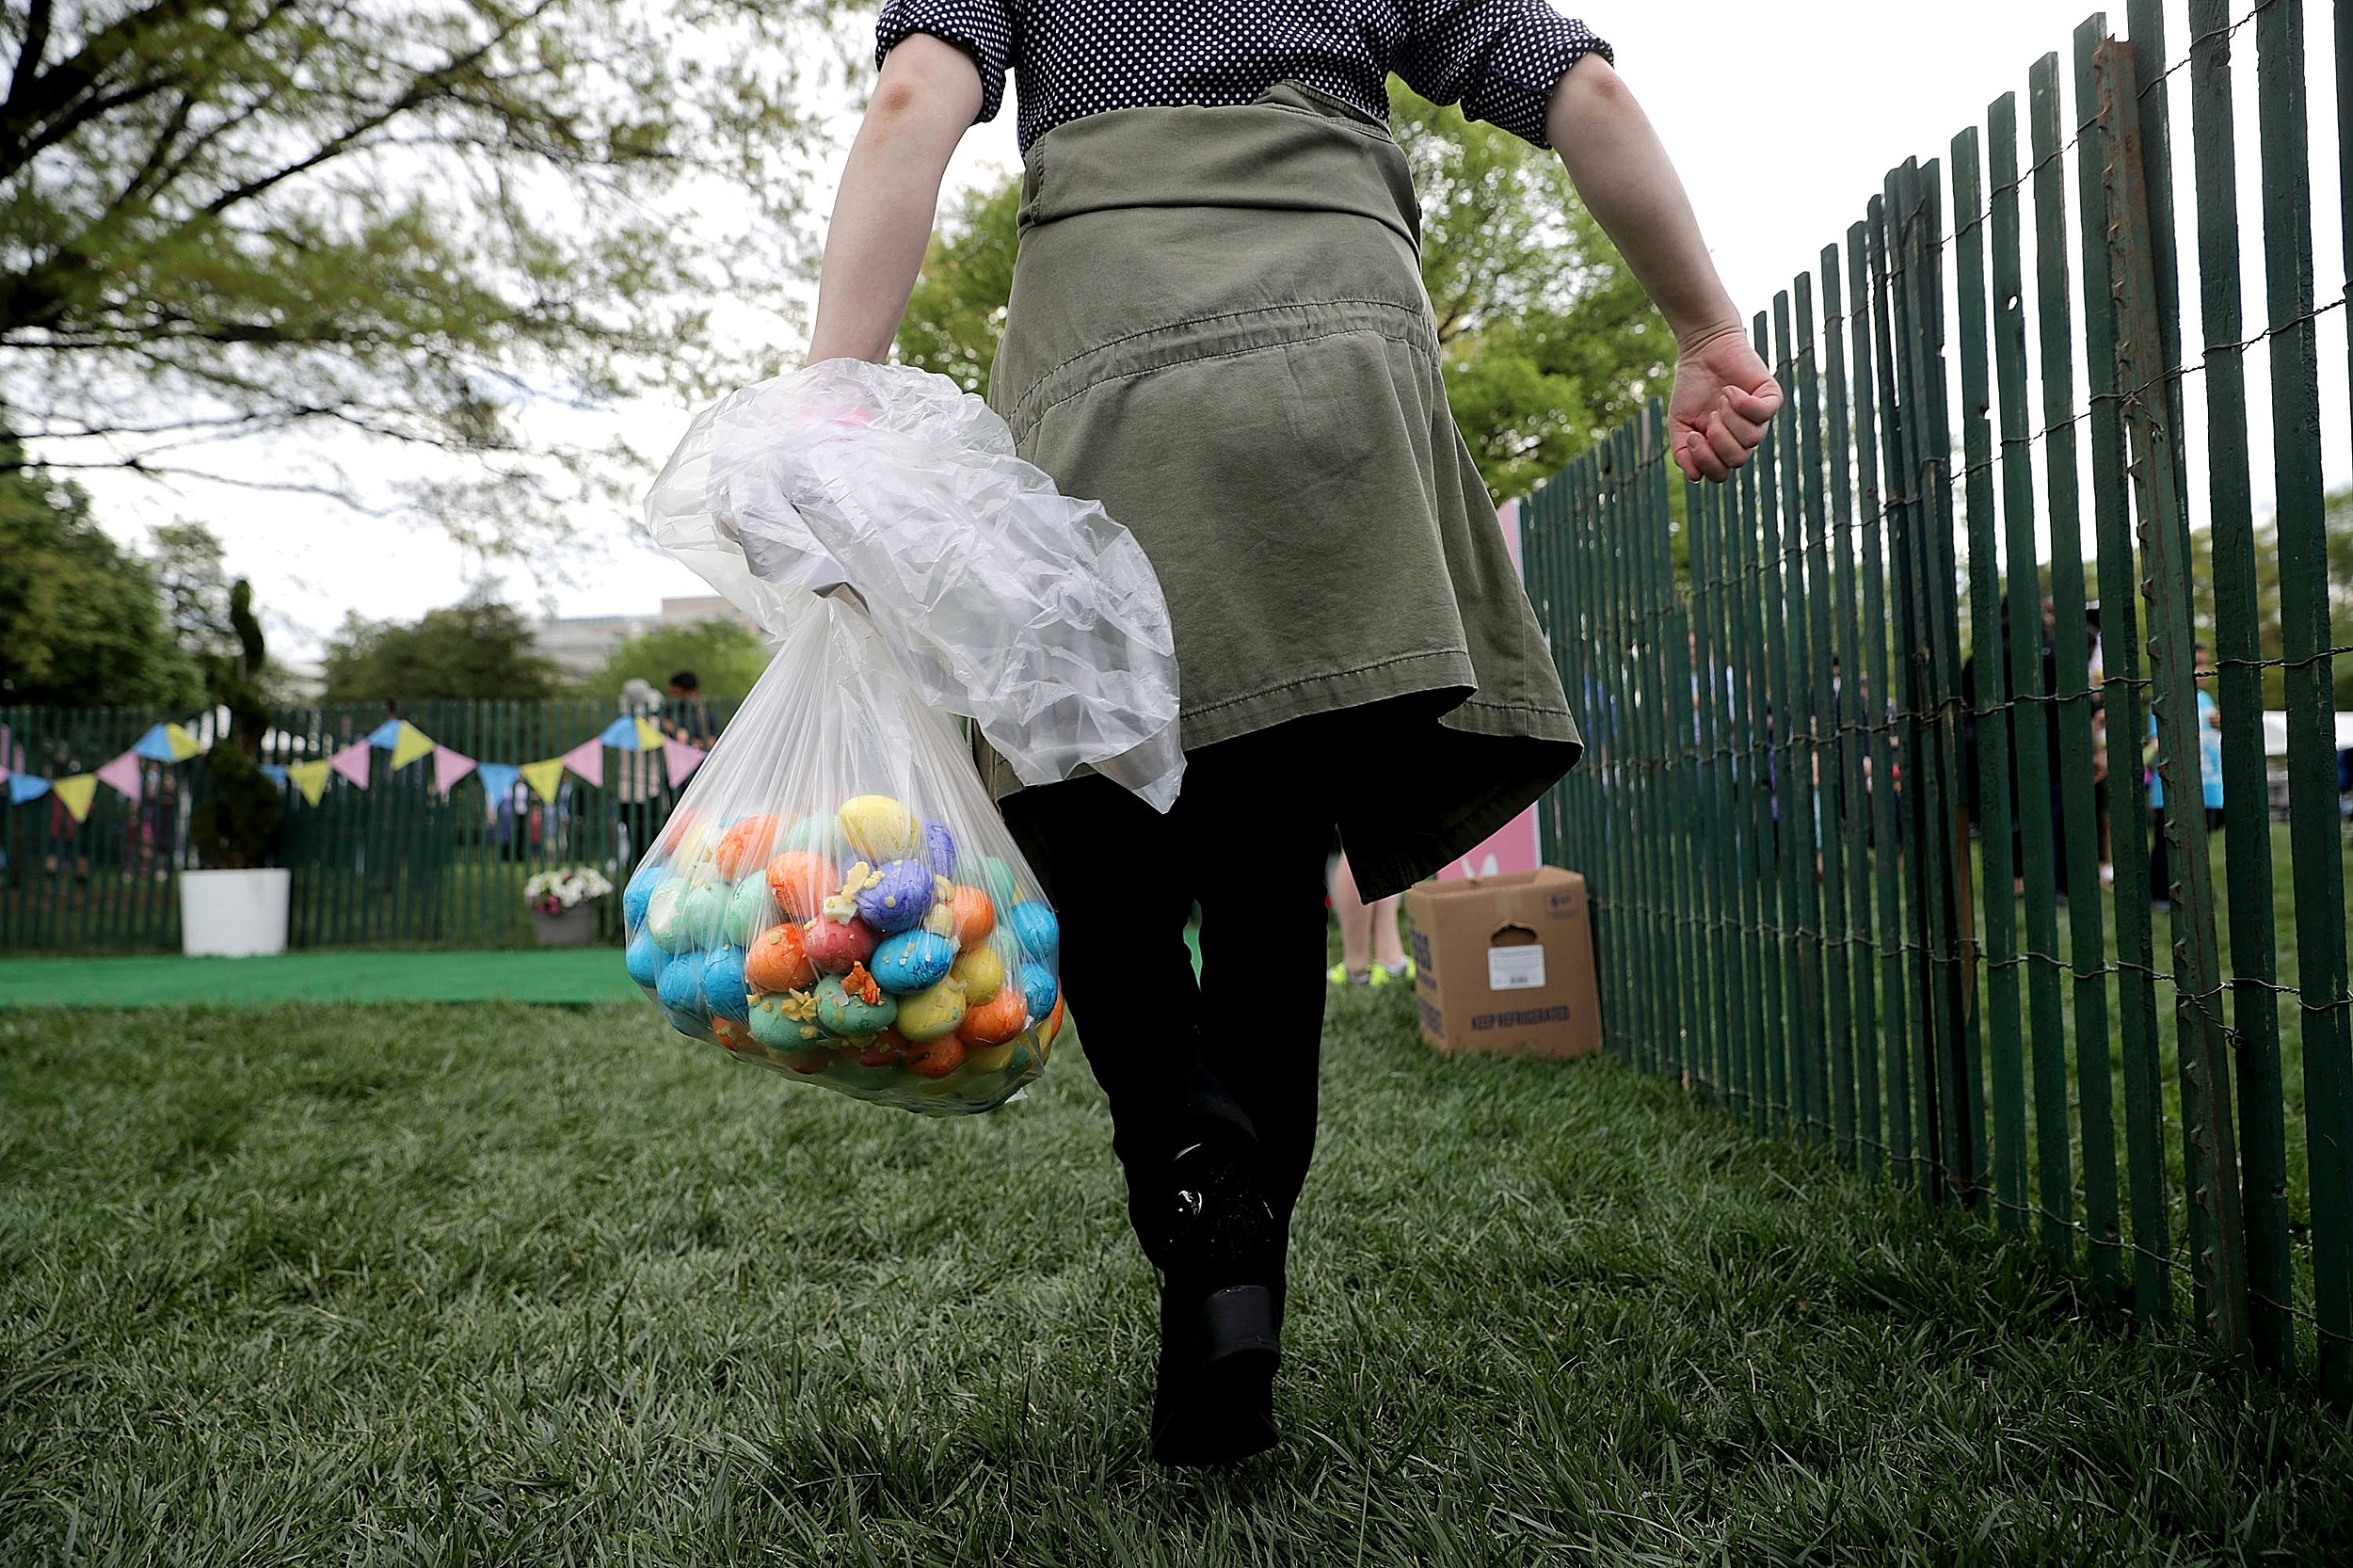 Exactly Why the Easter Egg Hunt Is a Terrible Tradition